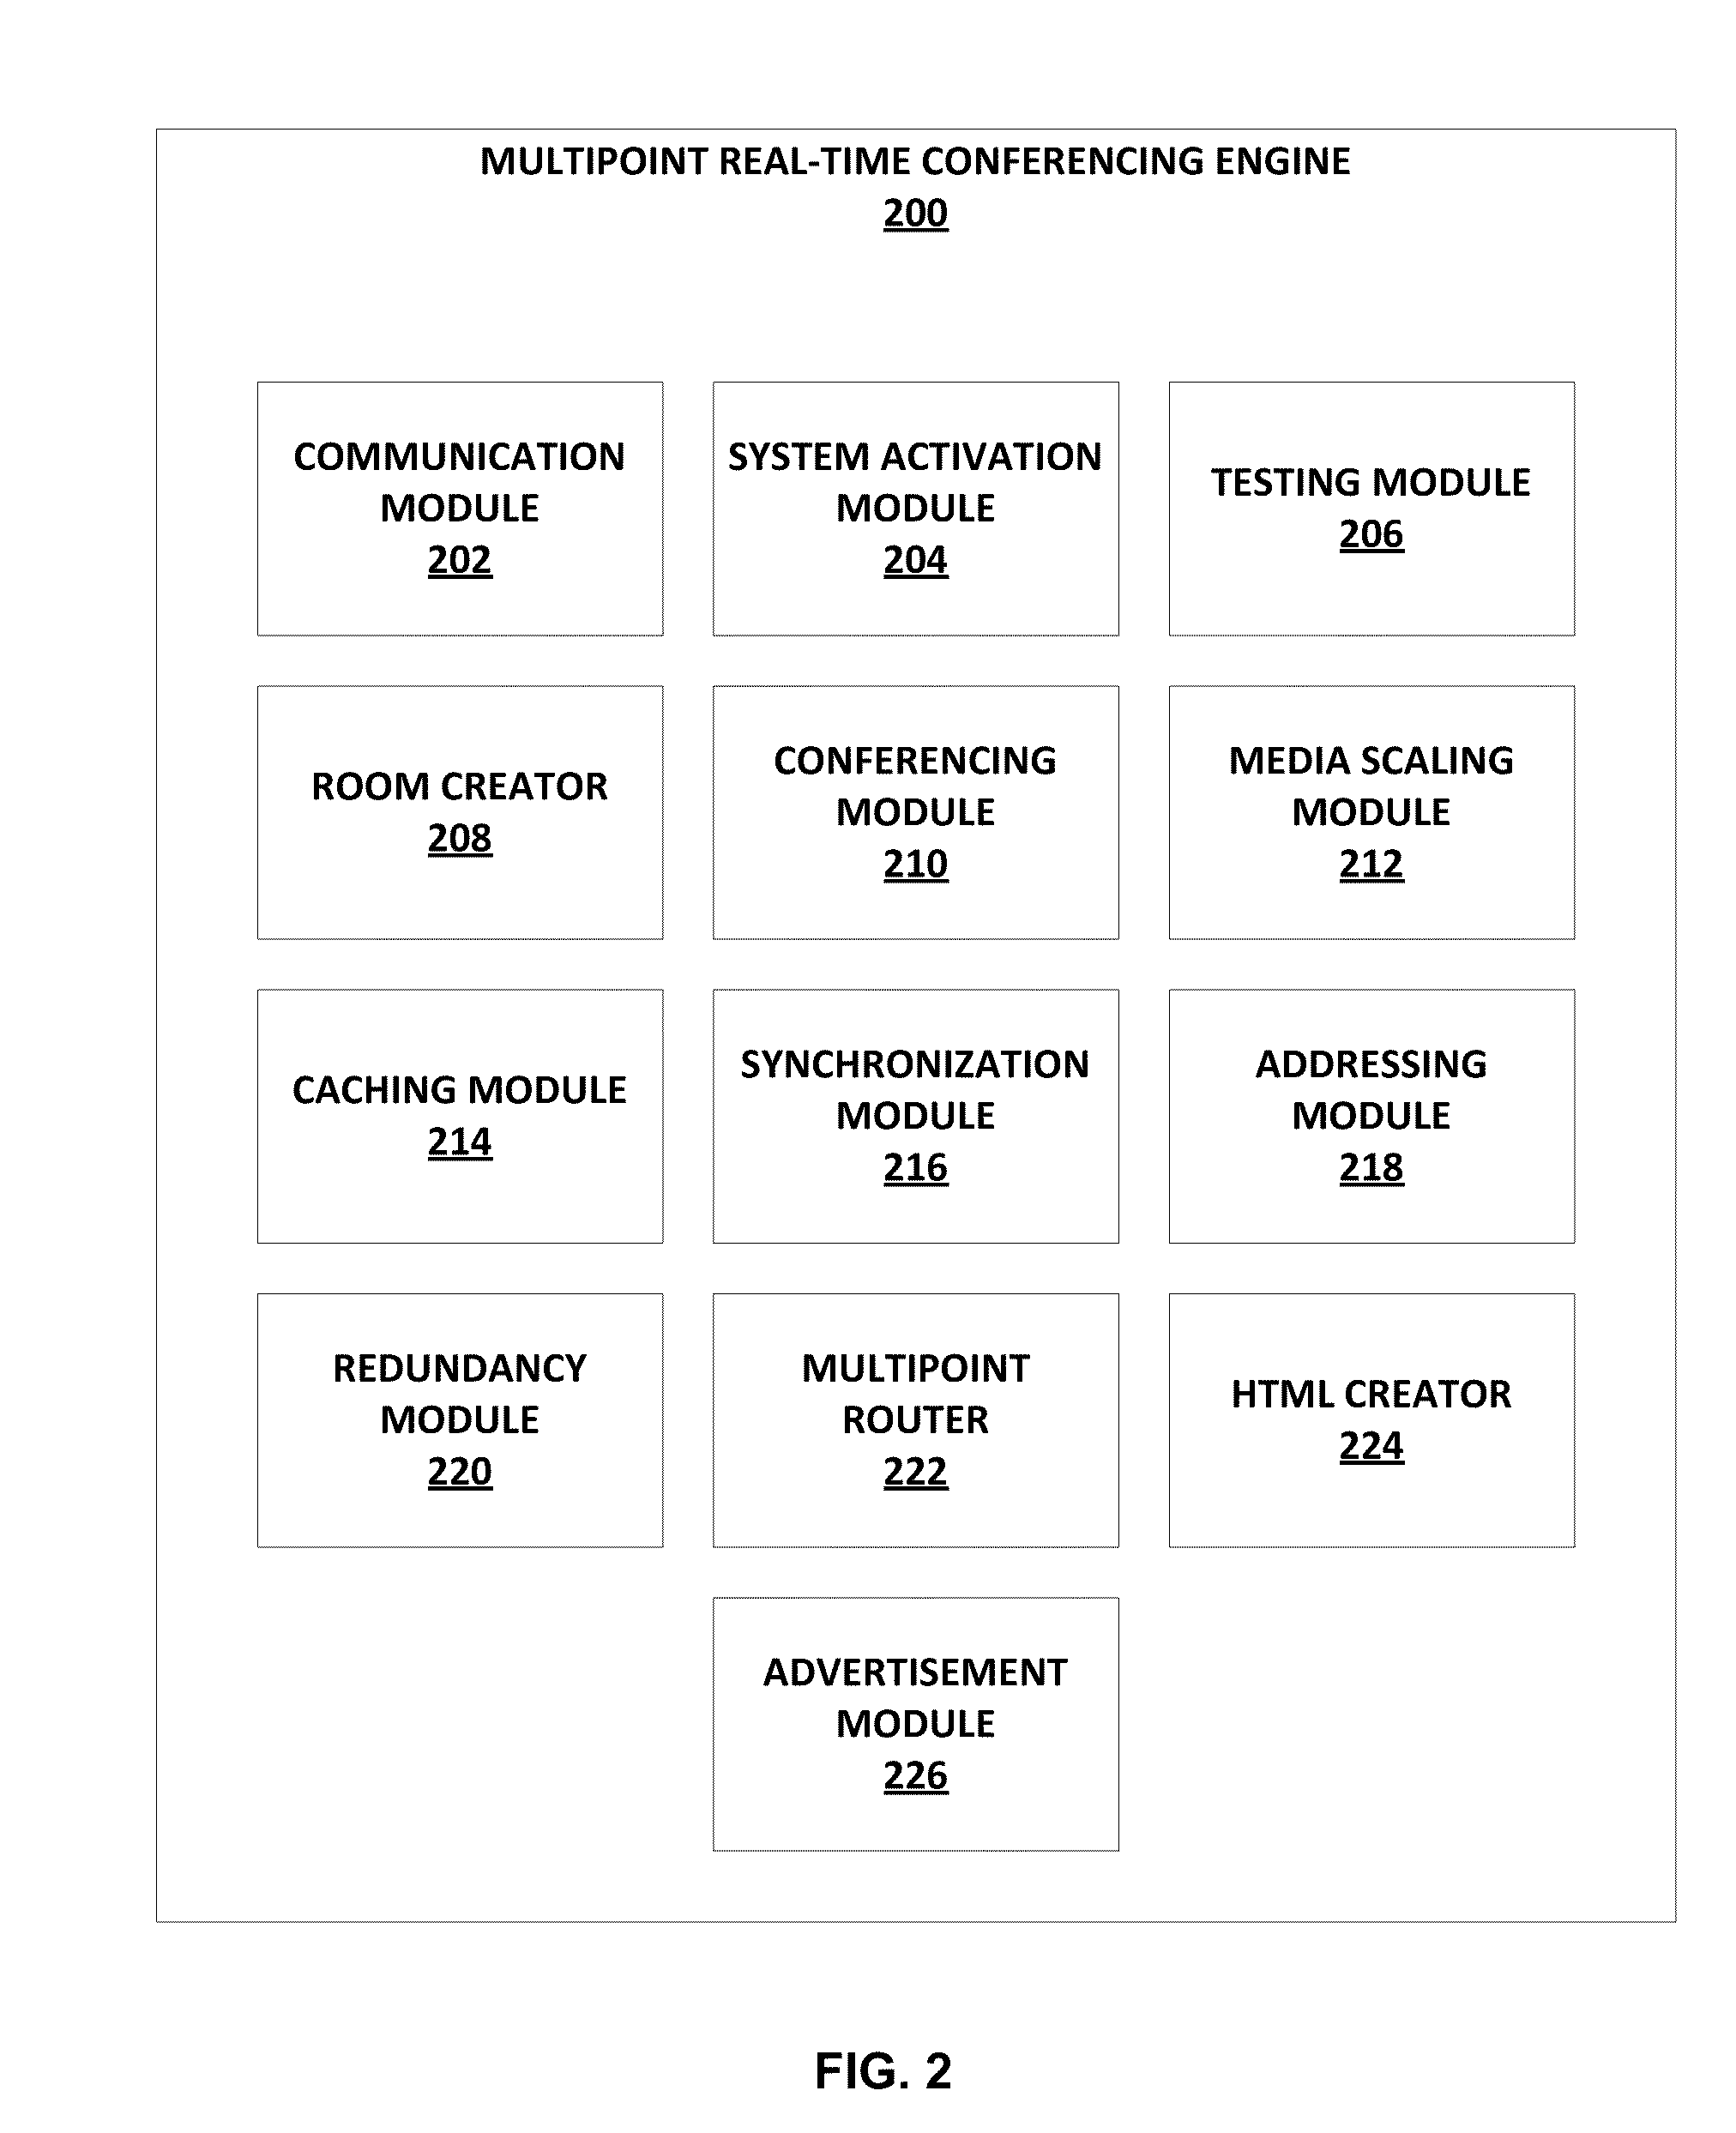 Systems and methods for multimedia multipoint real-time conferencing